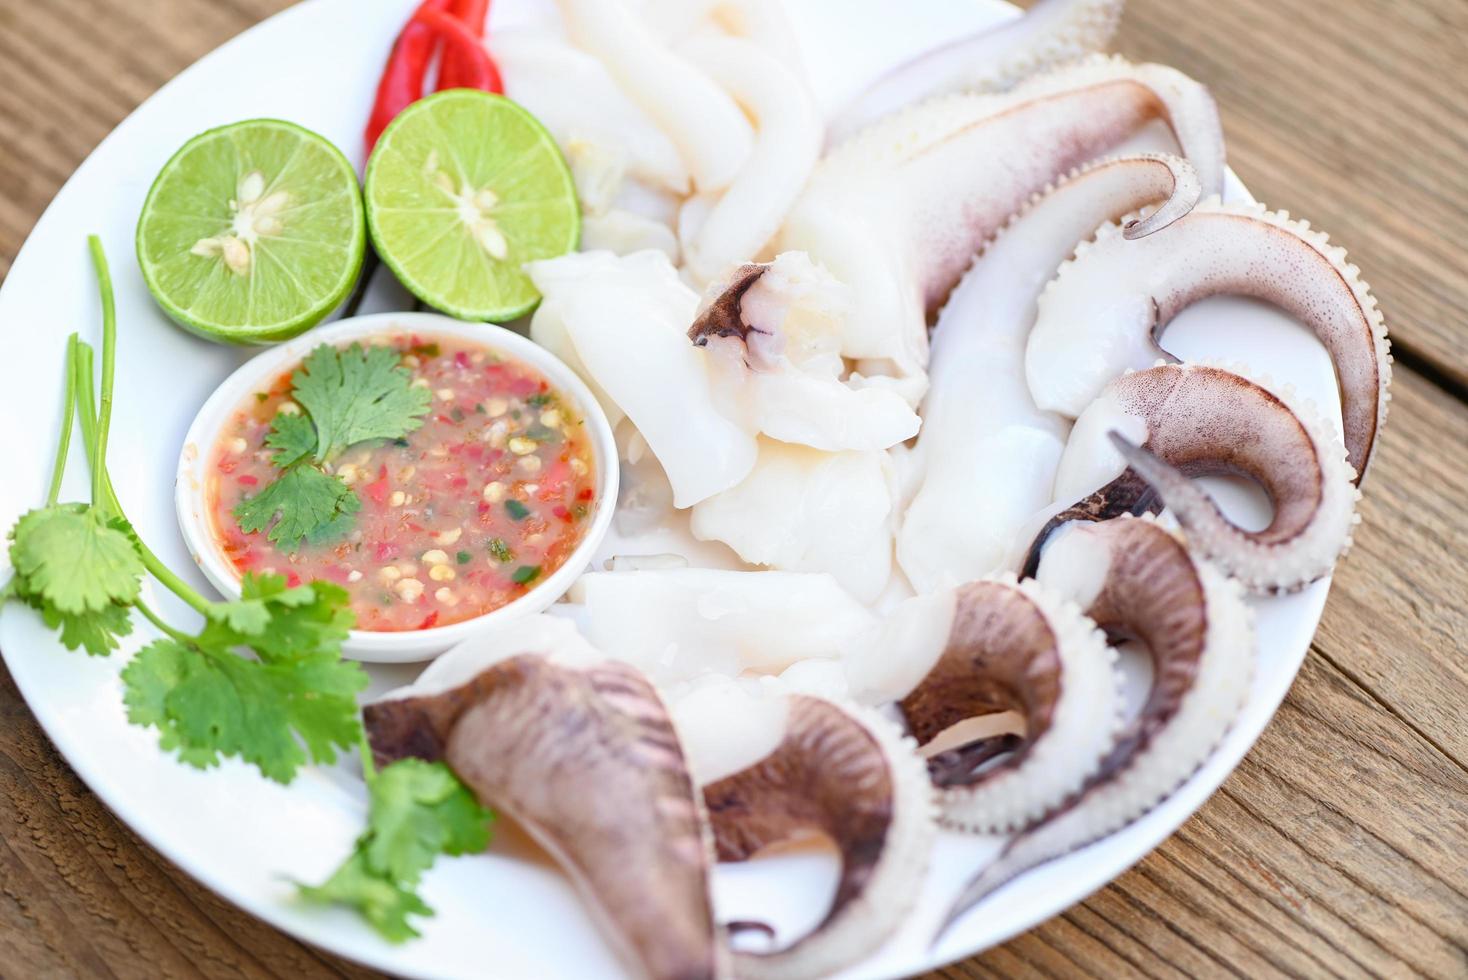 seafood plate squid food on white plate, Fresh squid cooked boiled steam with vegetable salad lemon lime and seafood sauce chili sauce serve on table, octopus tentacles cuttlefish ocean gourmet photo